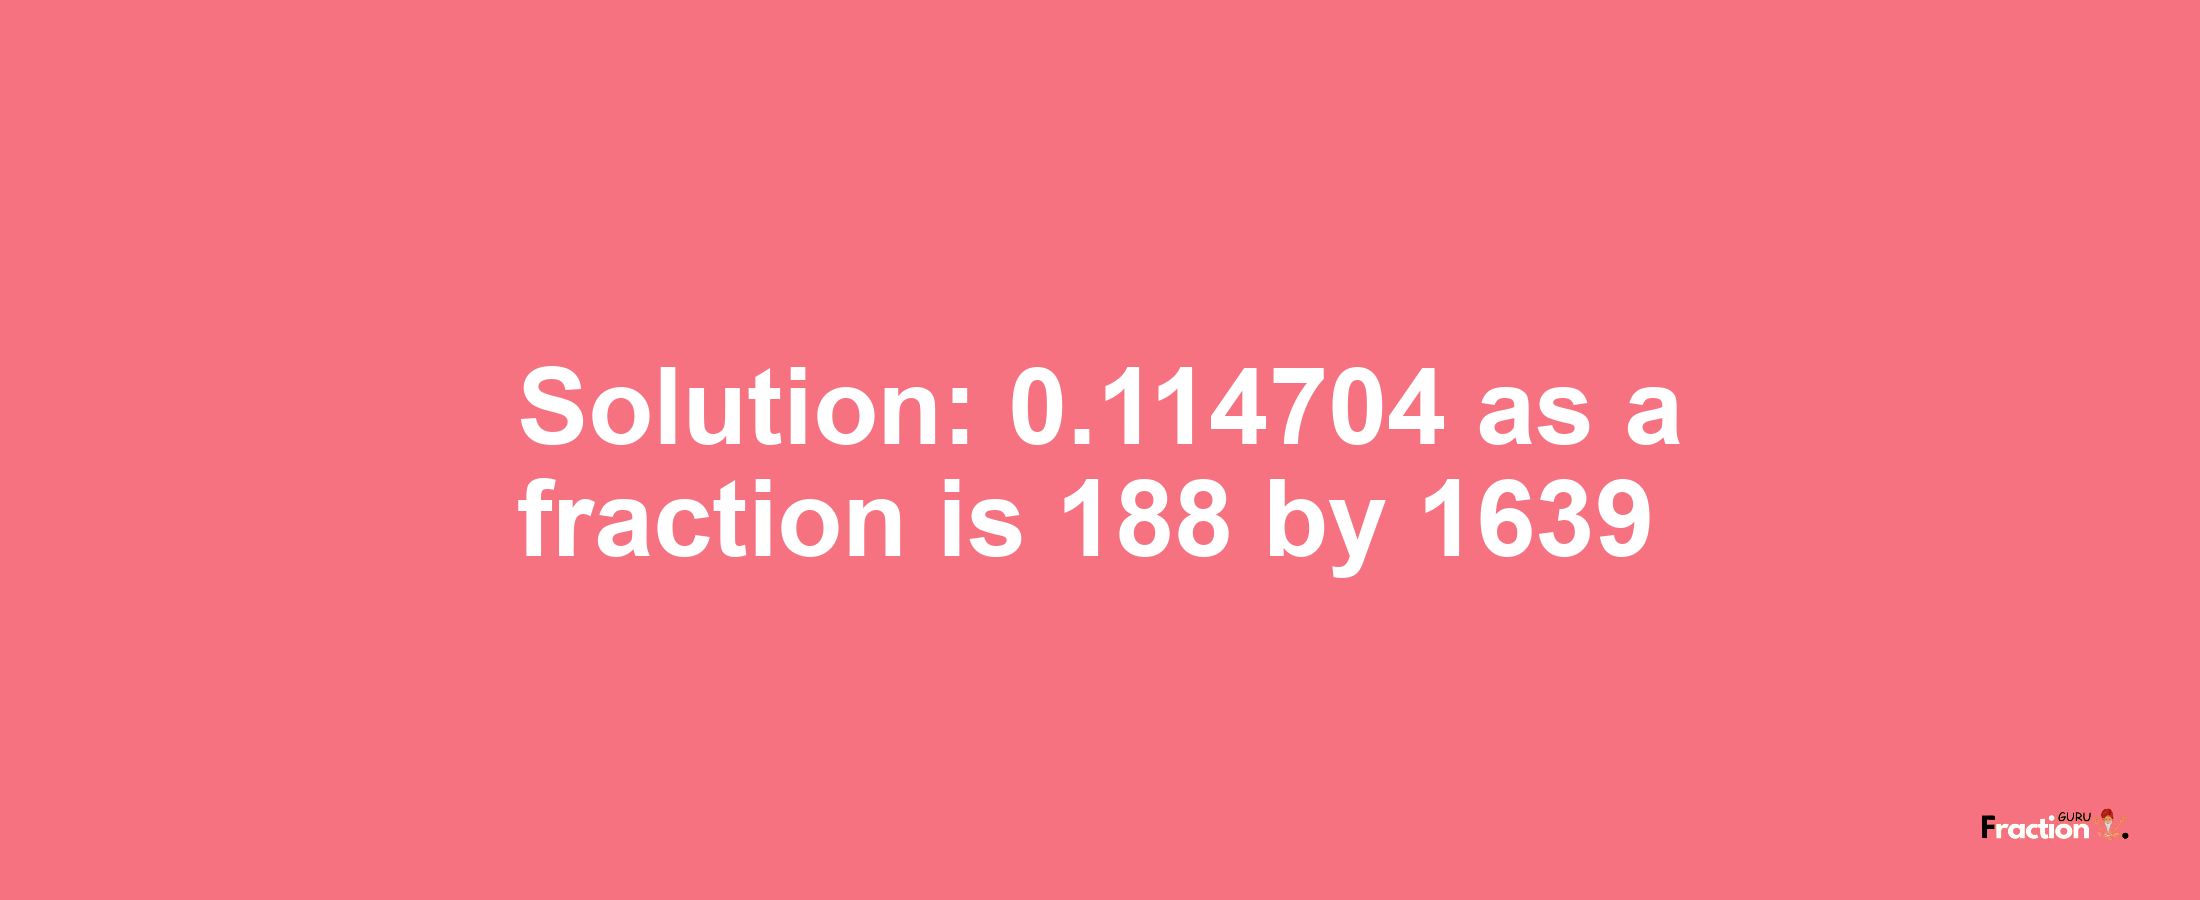 Solution:0.114704 as a fraction is 188/1639